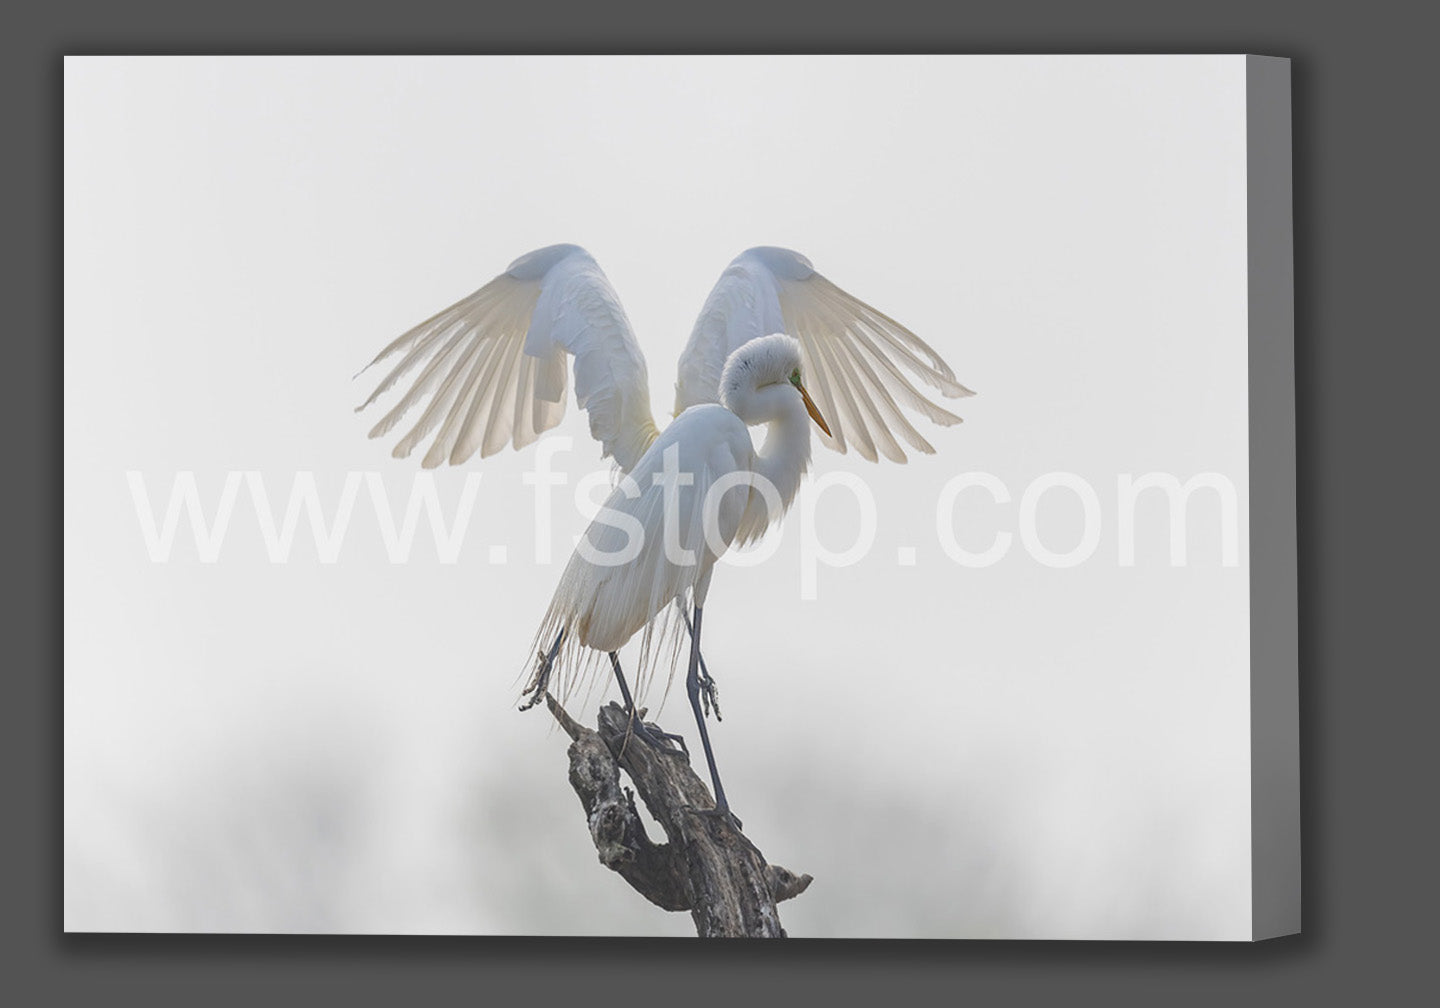 Won't You Take Me with You (Canvas Print) - WATERMARKS will not appear on finished products